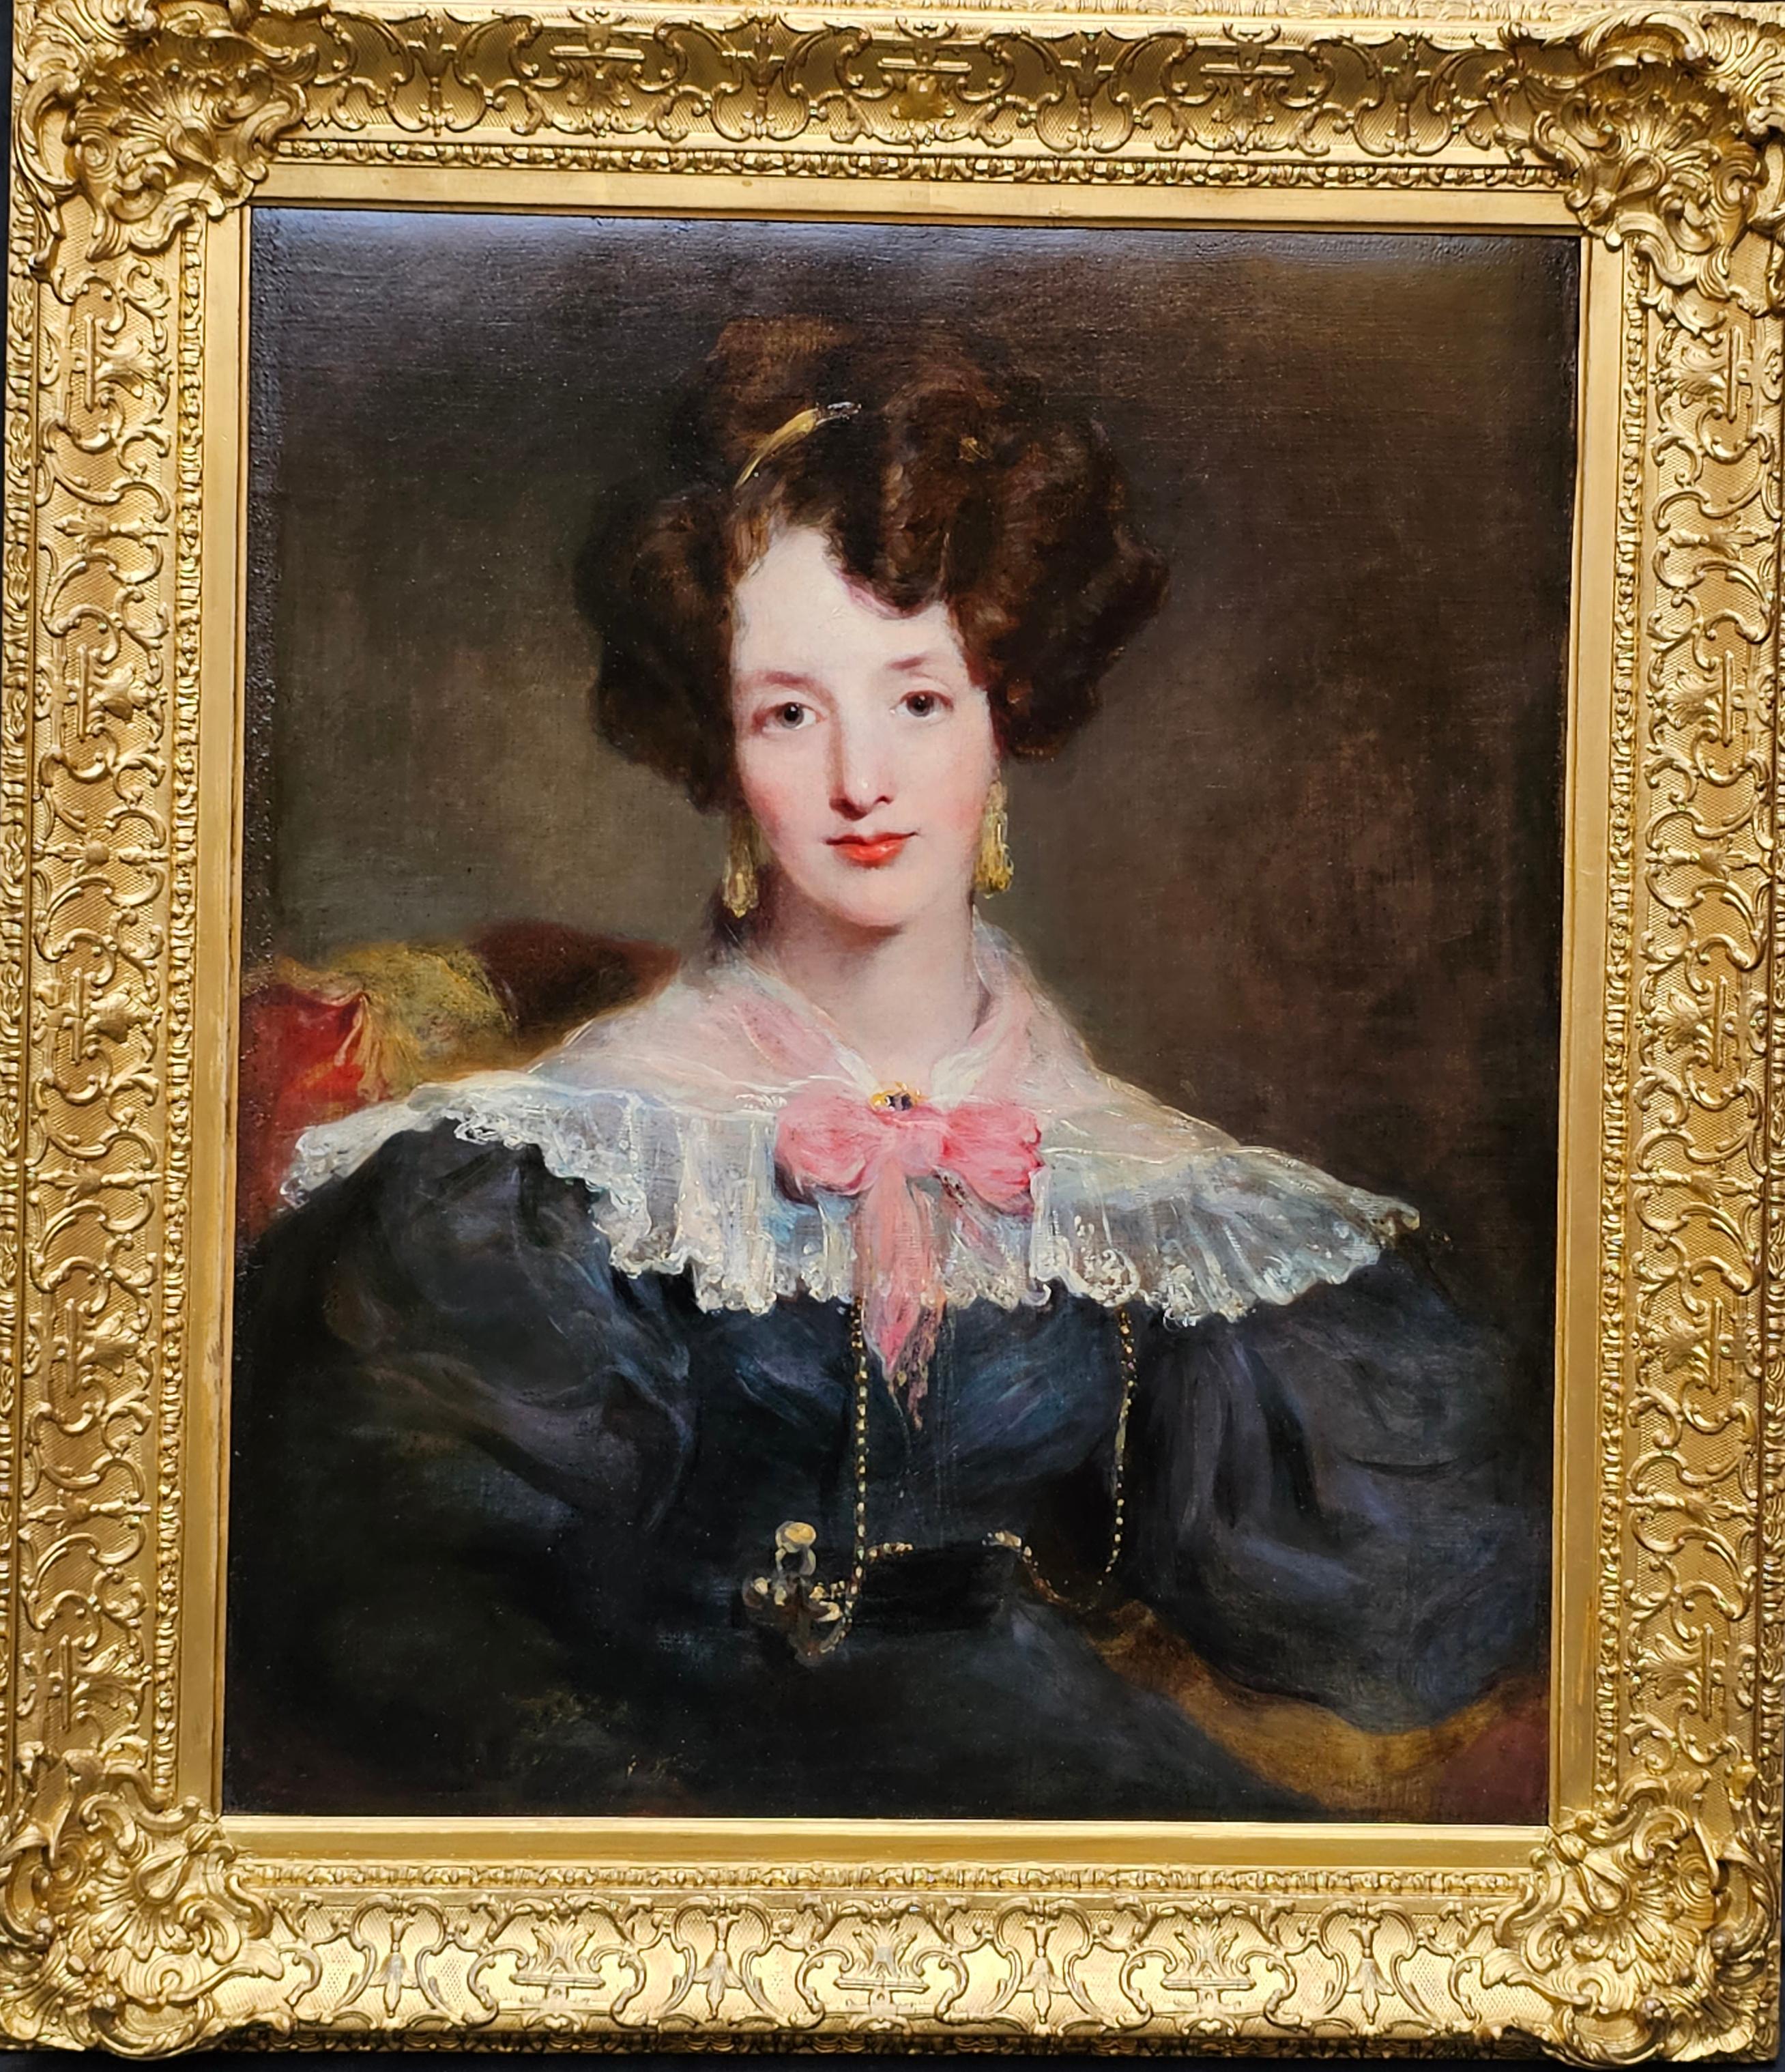 Sir Thomas Lawrence Portrait Painting - Portrait of a Lady with Pink Bow - British c 1820 Old Master art oil painting